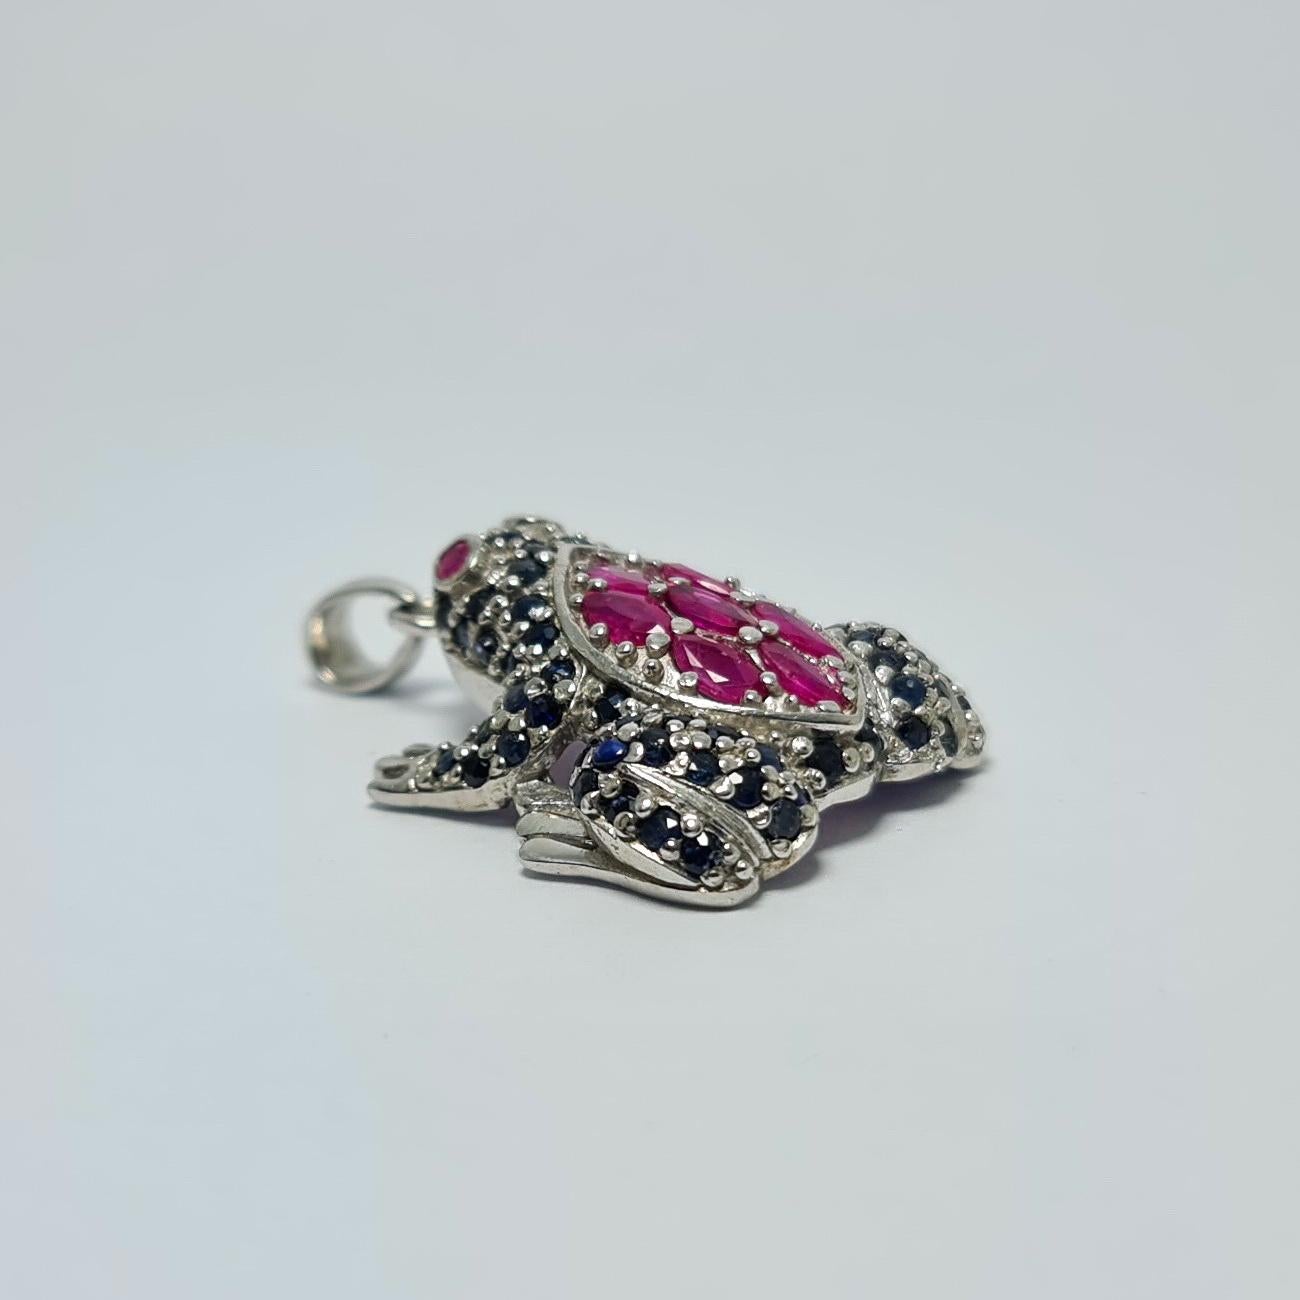 Natural glass filled Thailand Ruby of 3.5 Cts  and Natural Untreated Unheated Blue Thailand Sapphire of 8.5 Cts Frog Designed Pendant set in .925 Sterling Silver Rhodium Plated 